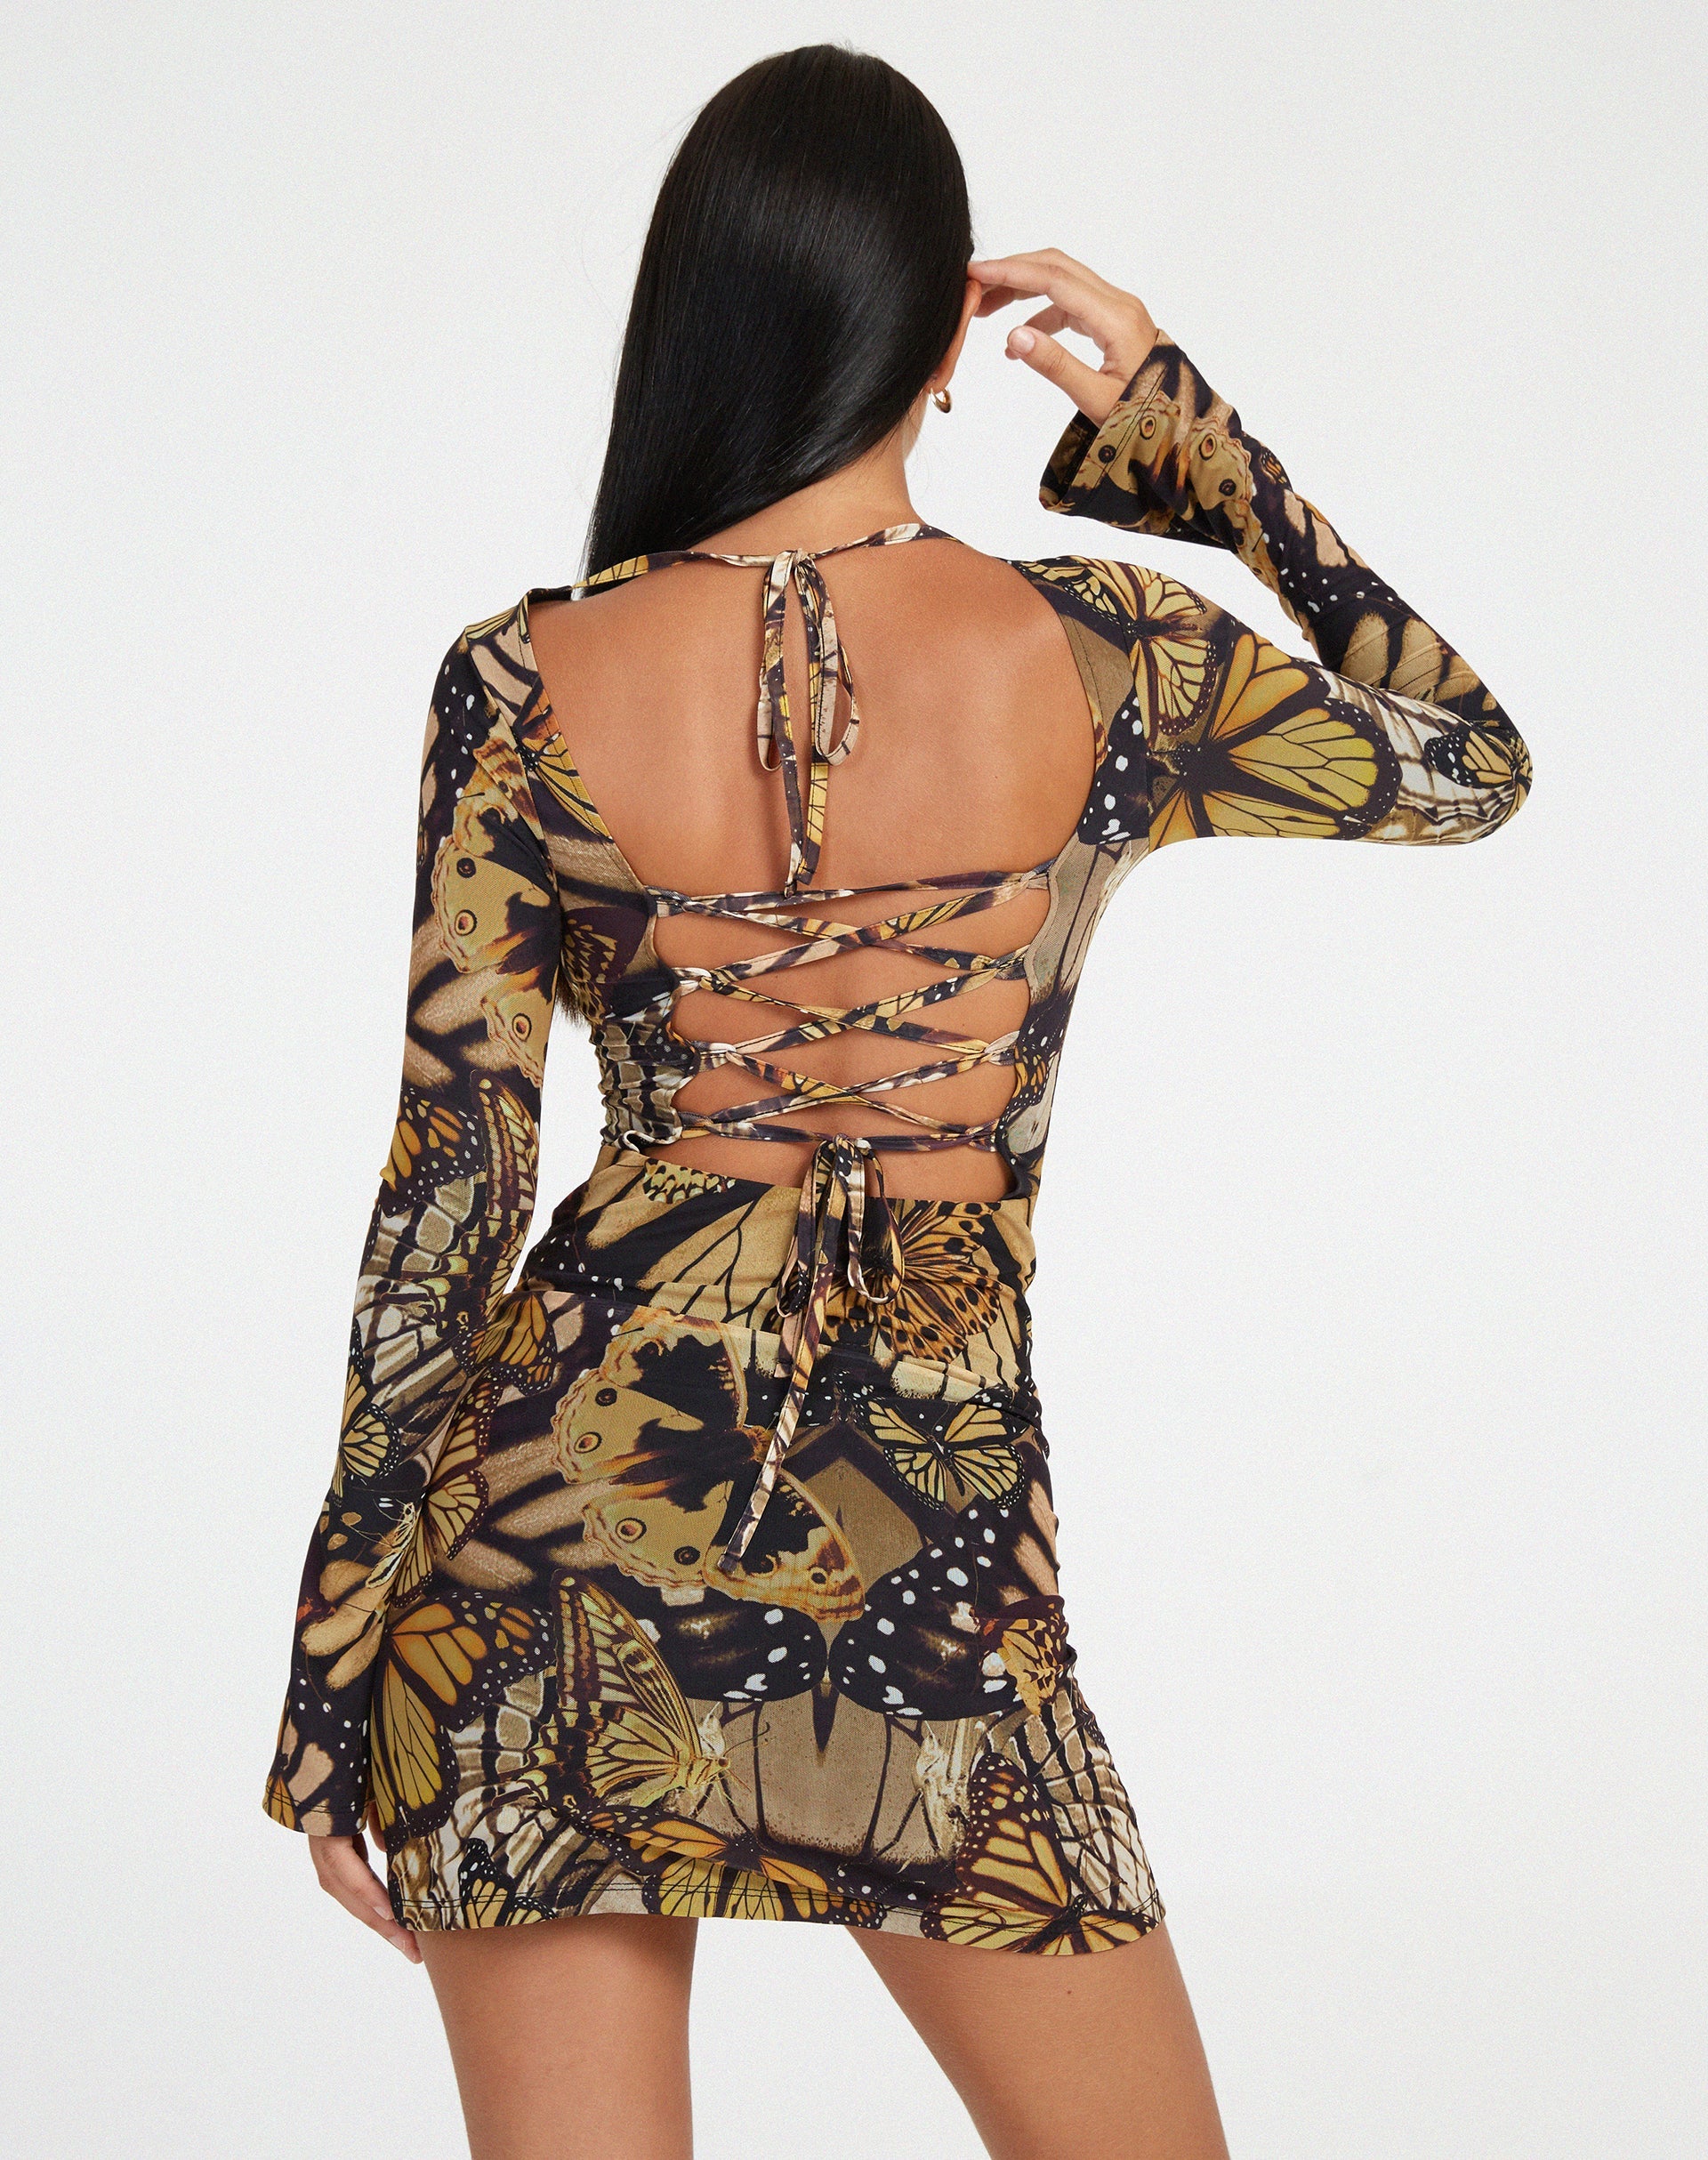 image of Onata Mini Dress in Butterfly Gold